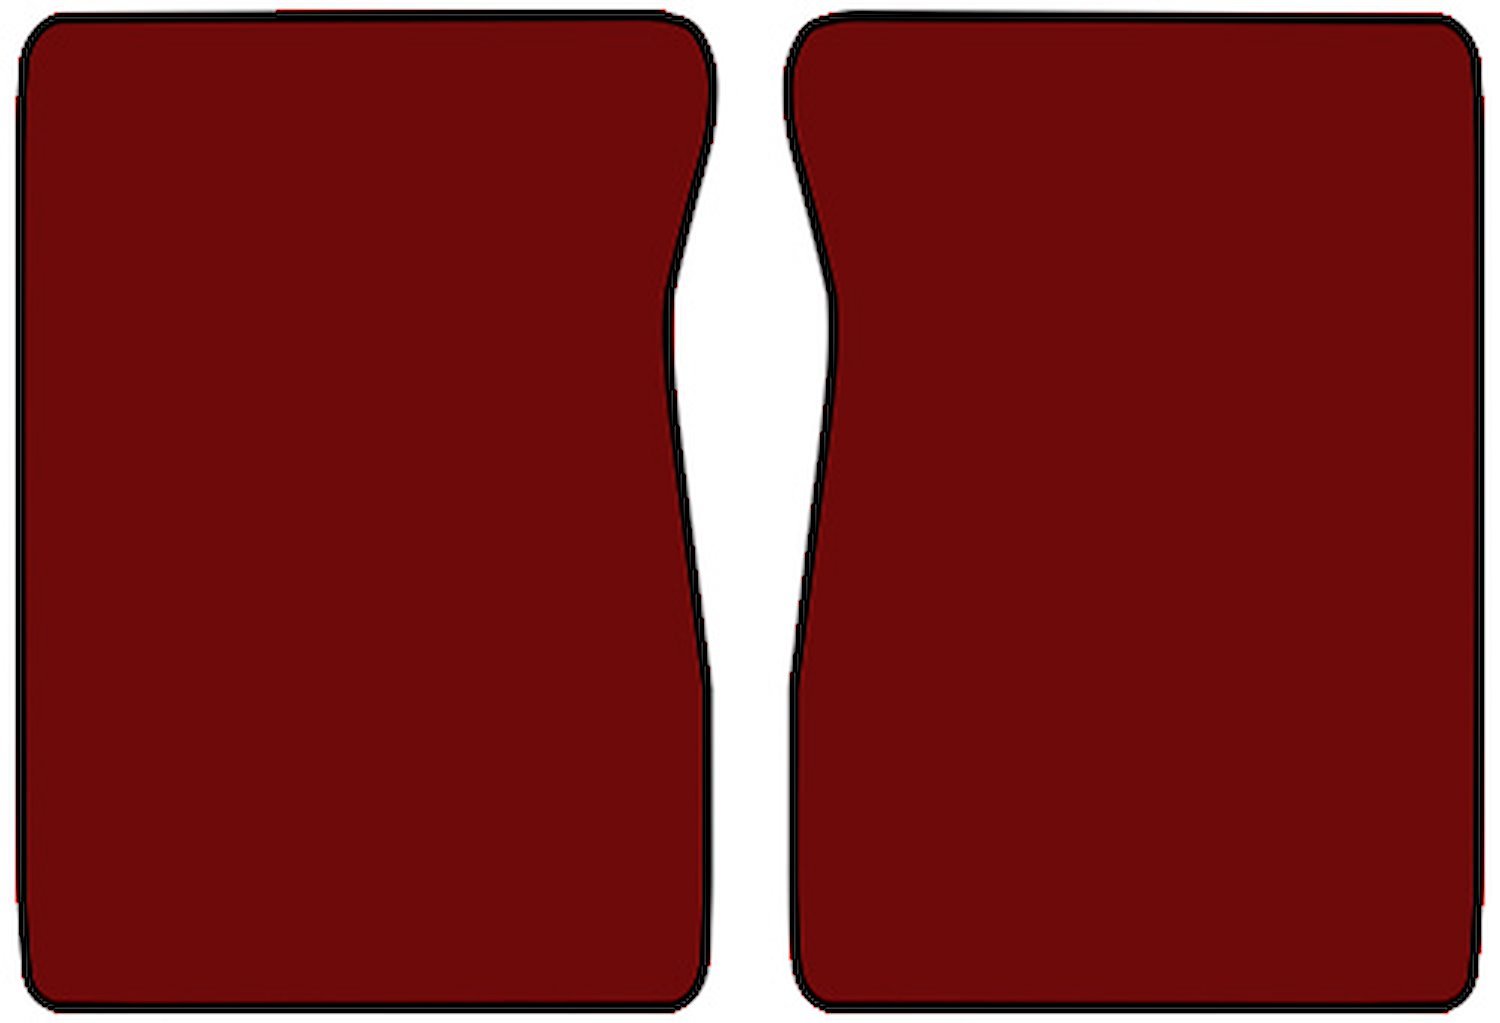 Molded Cut Pile Floor Mats for 1981-1986 C/K Series Chevrolet and GMC Trucks [2-Piece, Automatic/4-Speed, Dark Red]